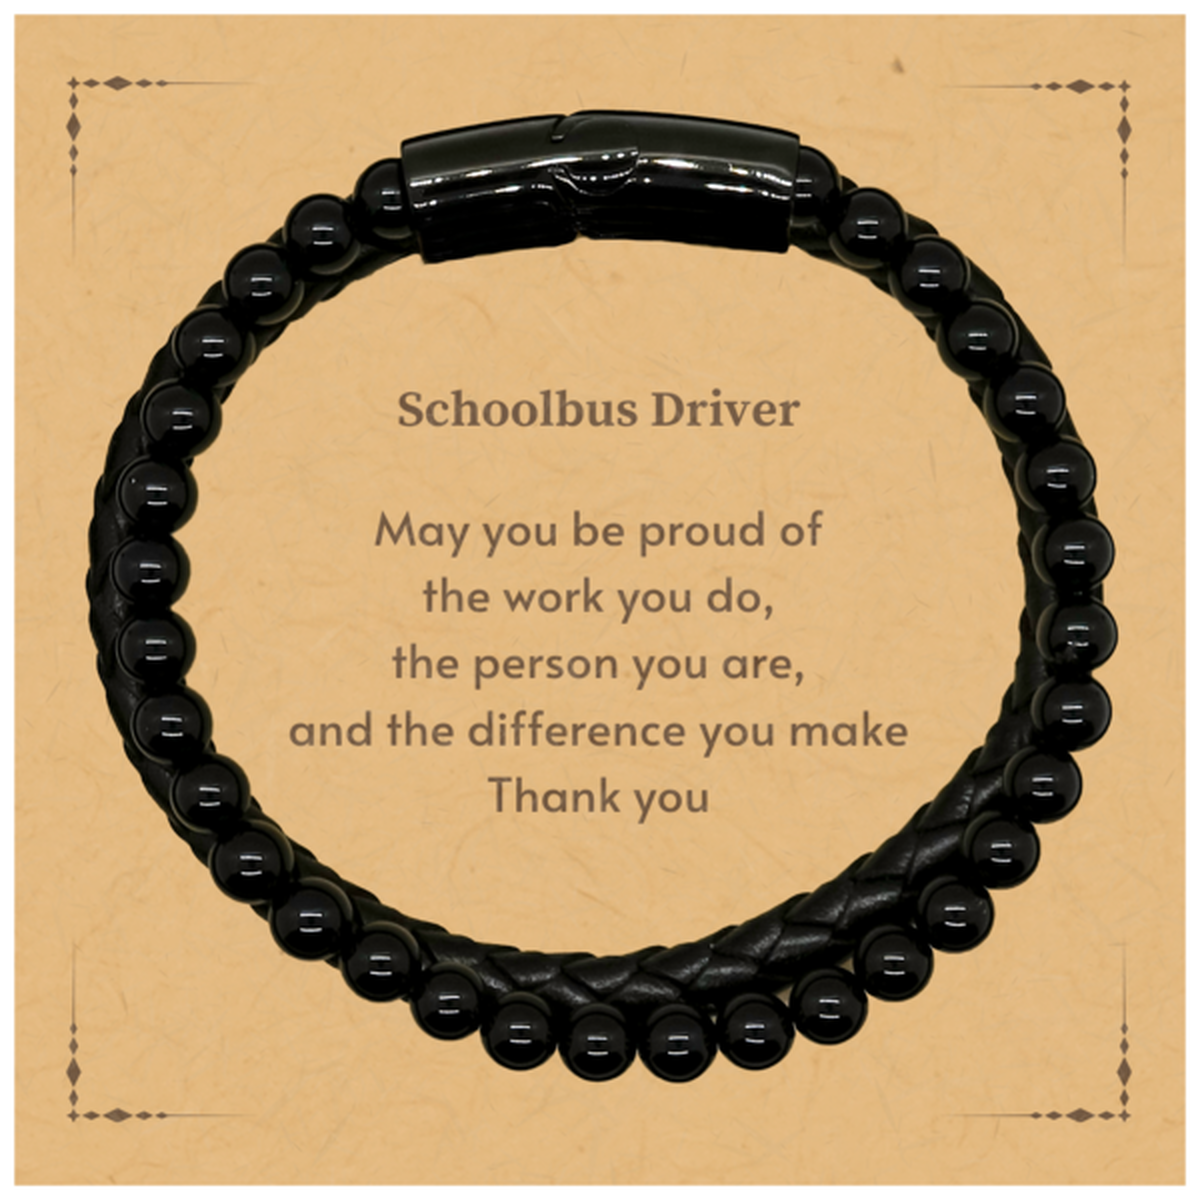 Heartwarming Stone Leather Bracelets Retirement Coworkers Gifts for Schoolbus Driver, Schoolbus Driver May You be proud of the work you do, the person you are Gifts for Boss Men Women Friends